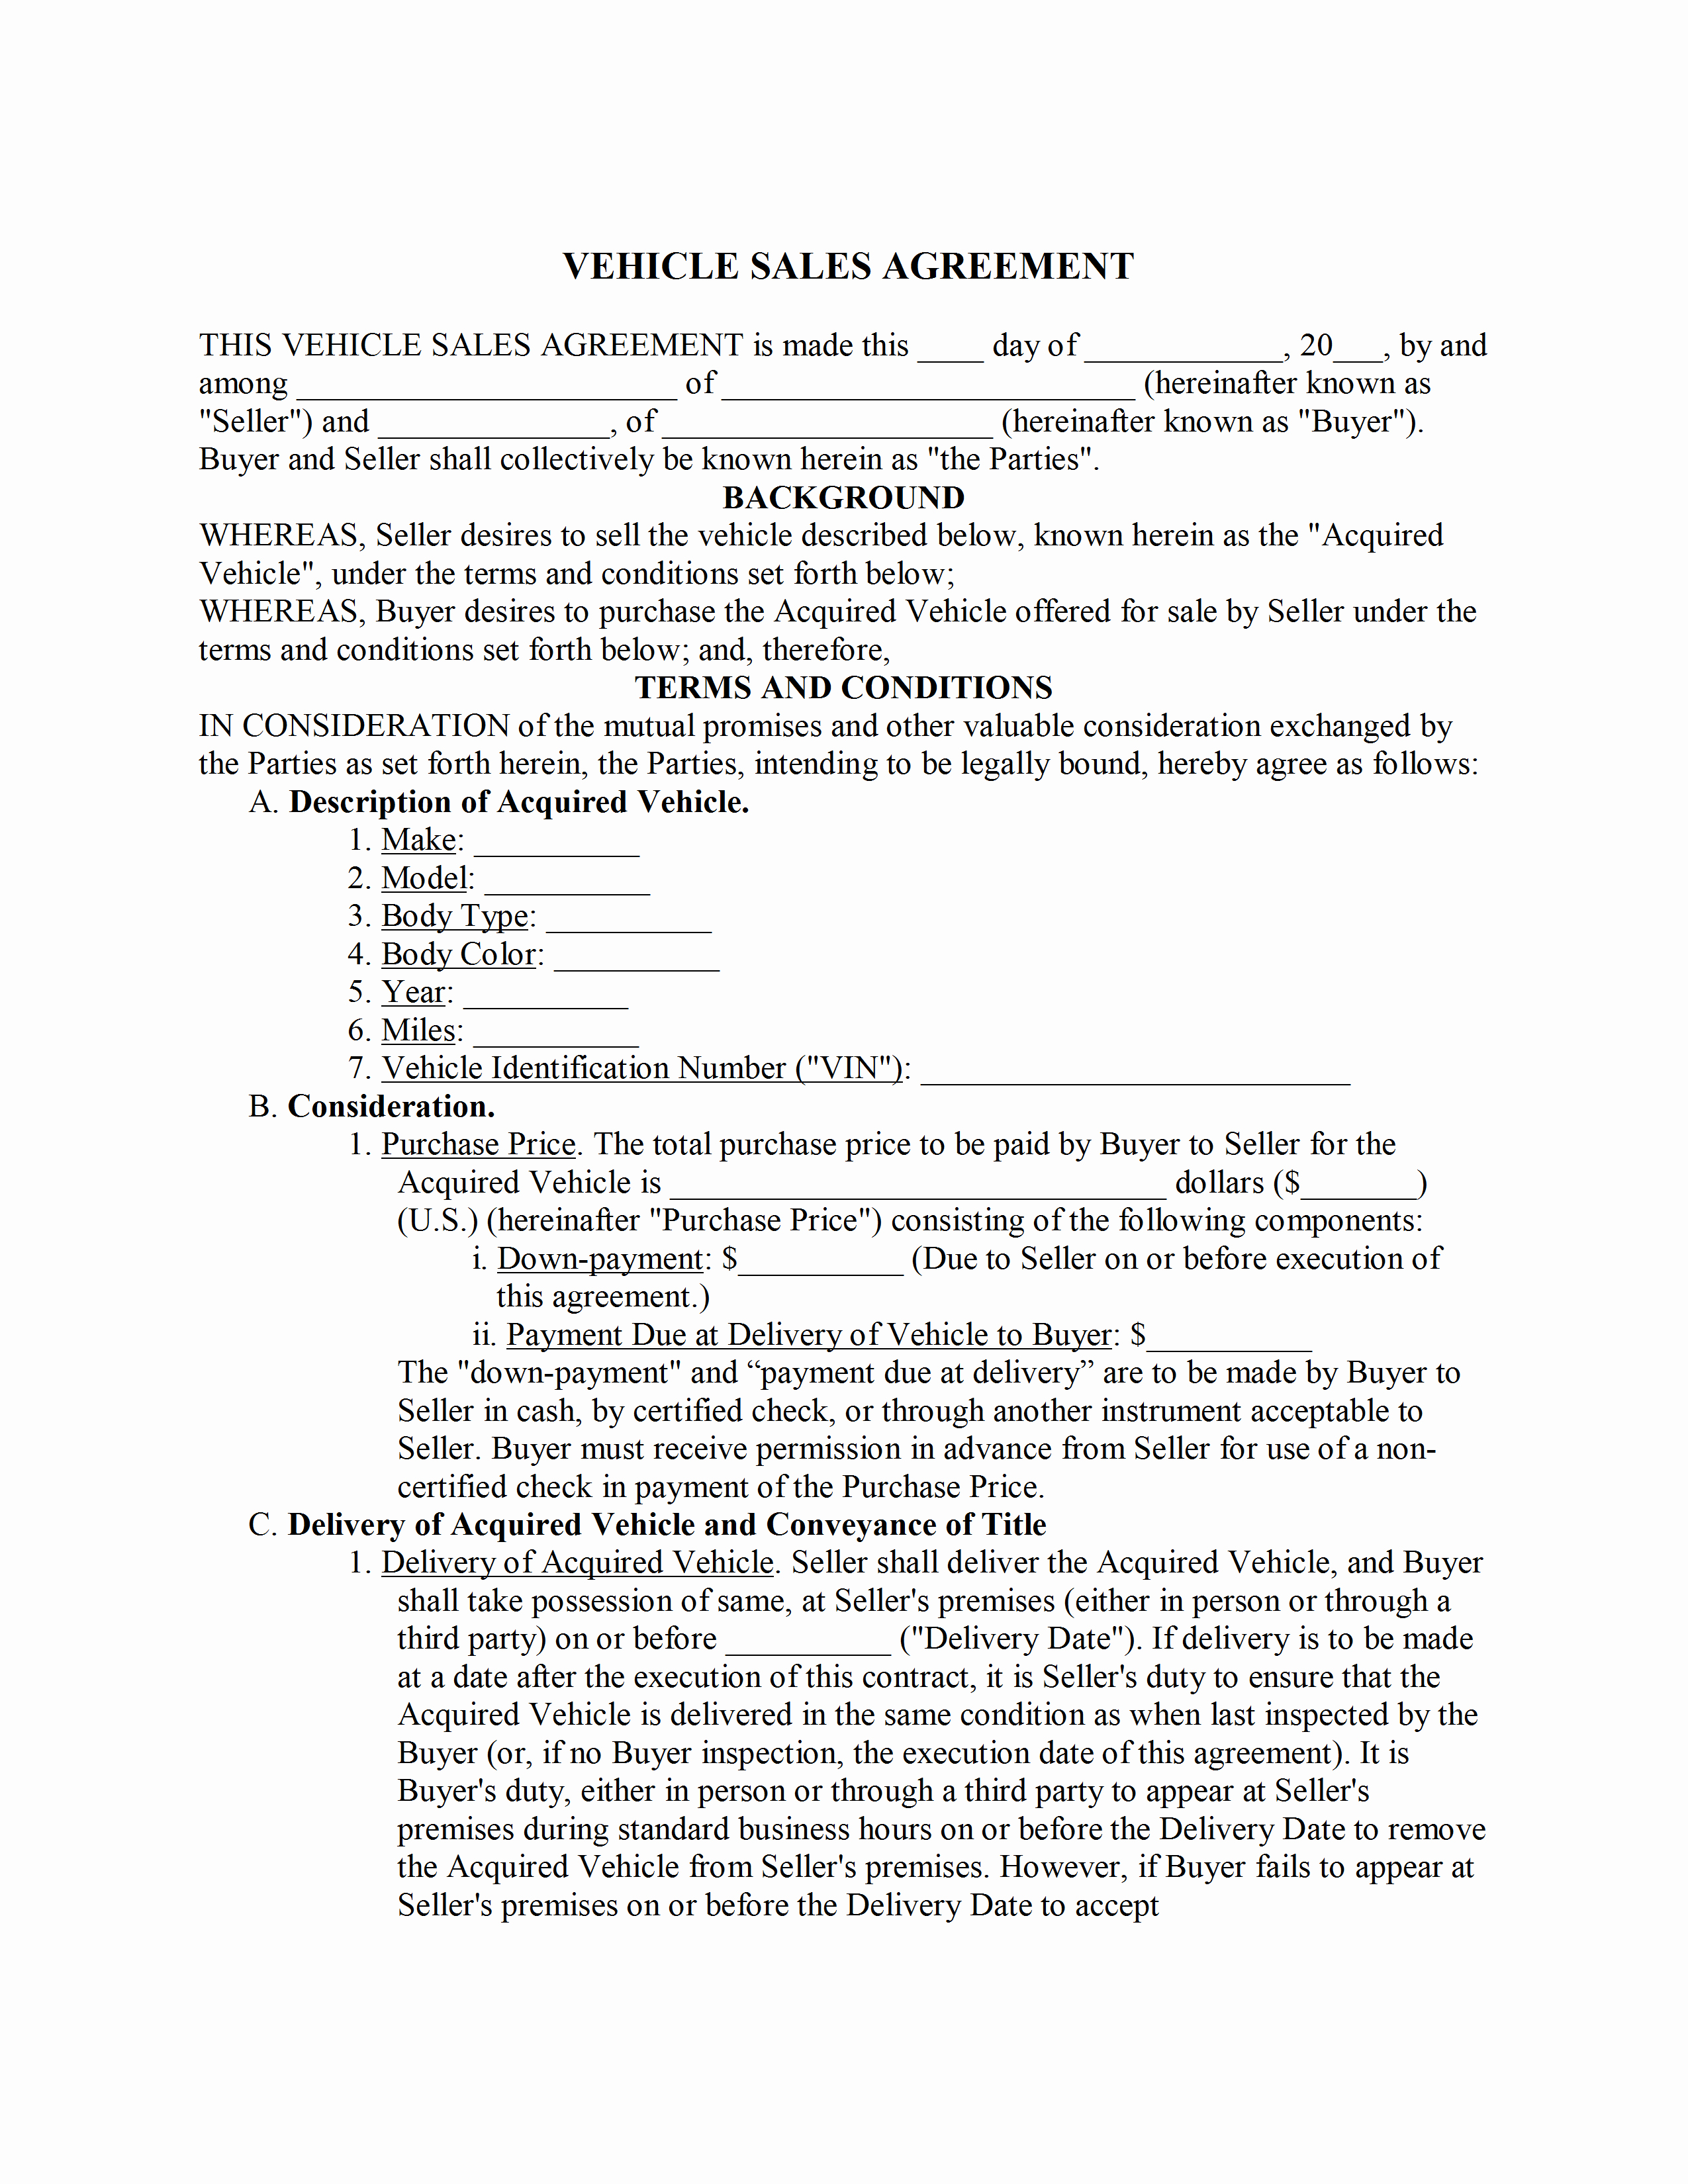 Vehicle Sale Agreement with Payments New Car Sale Agreement Template